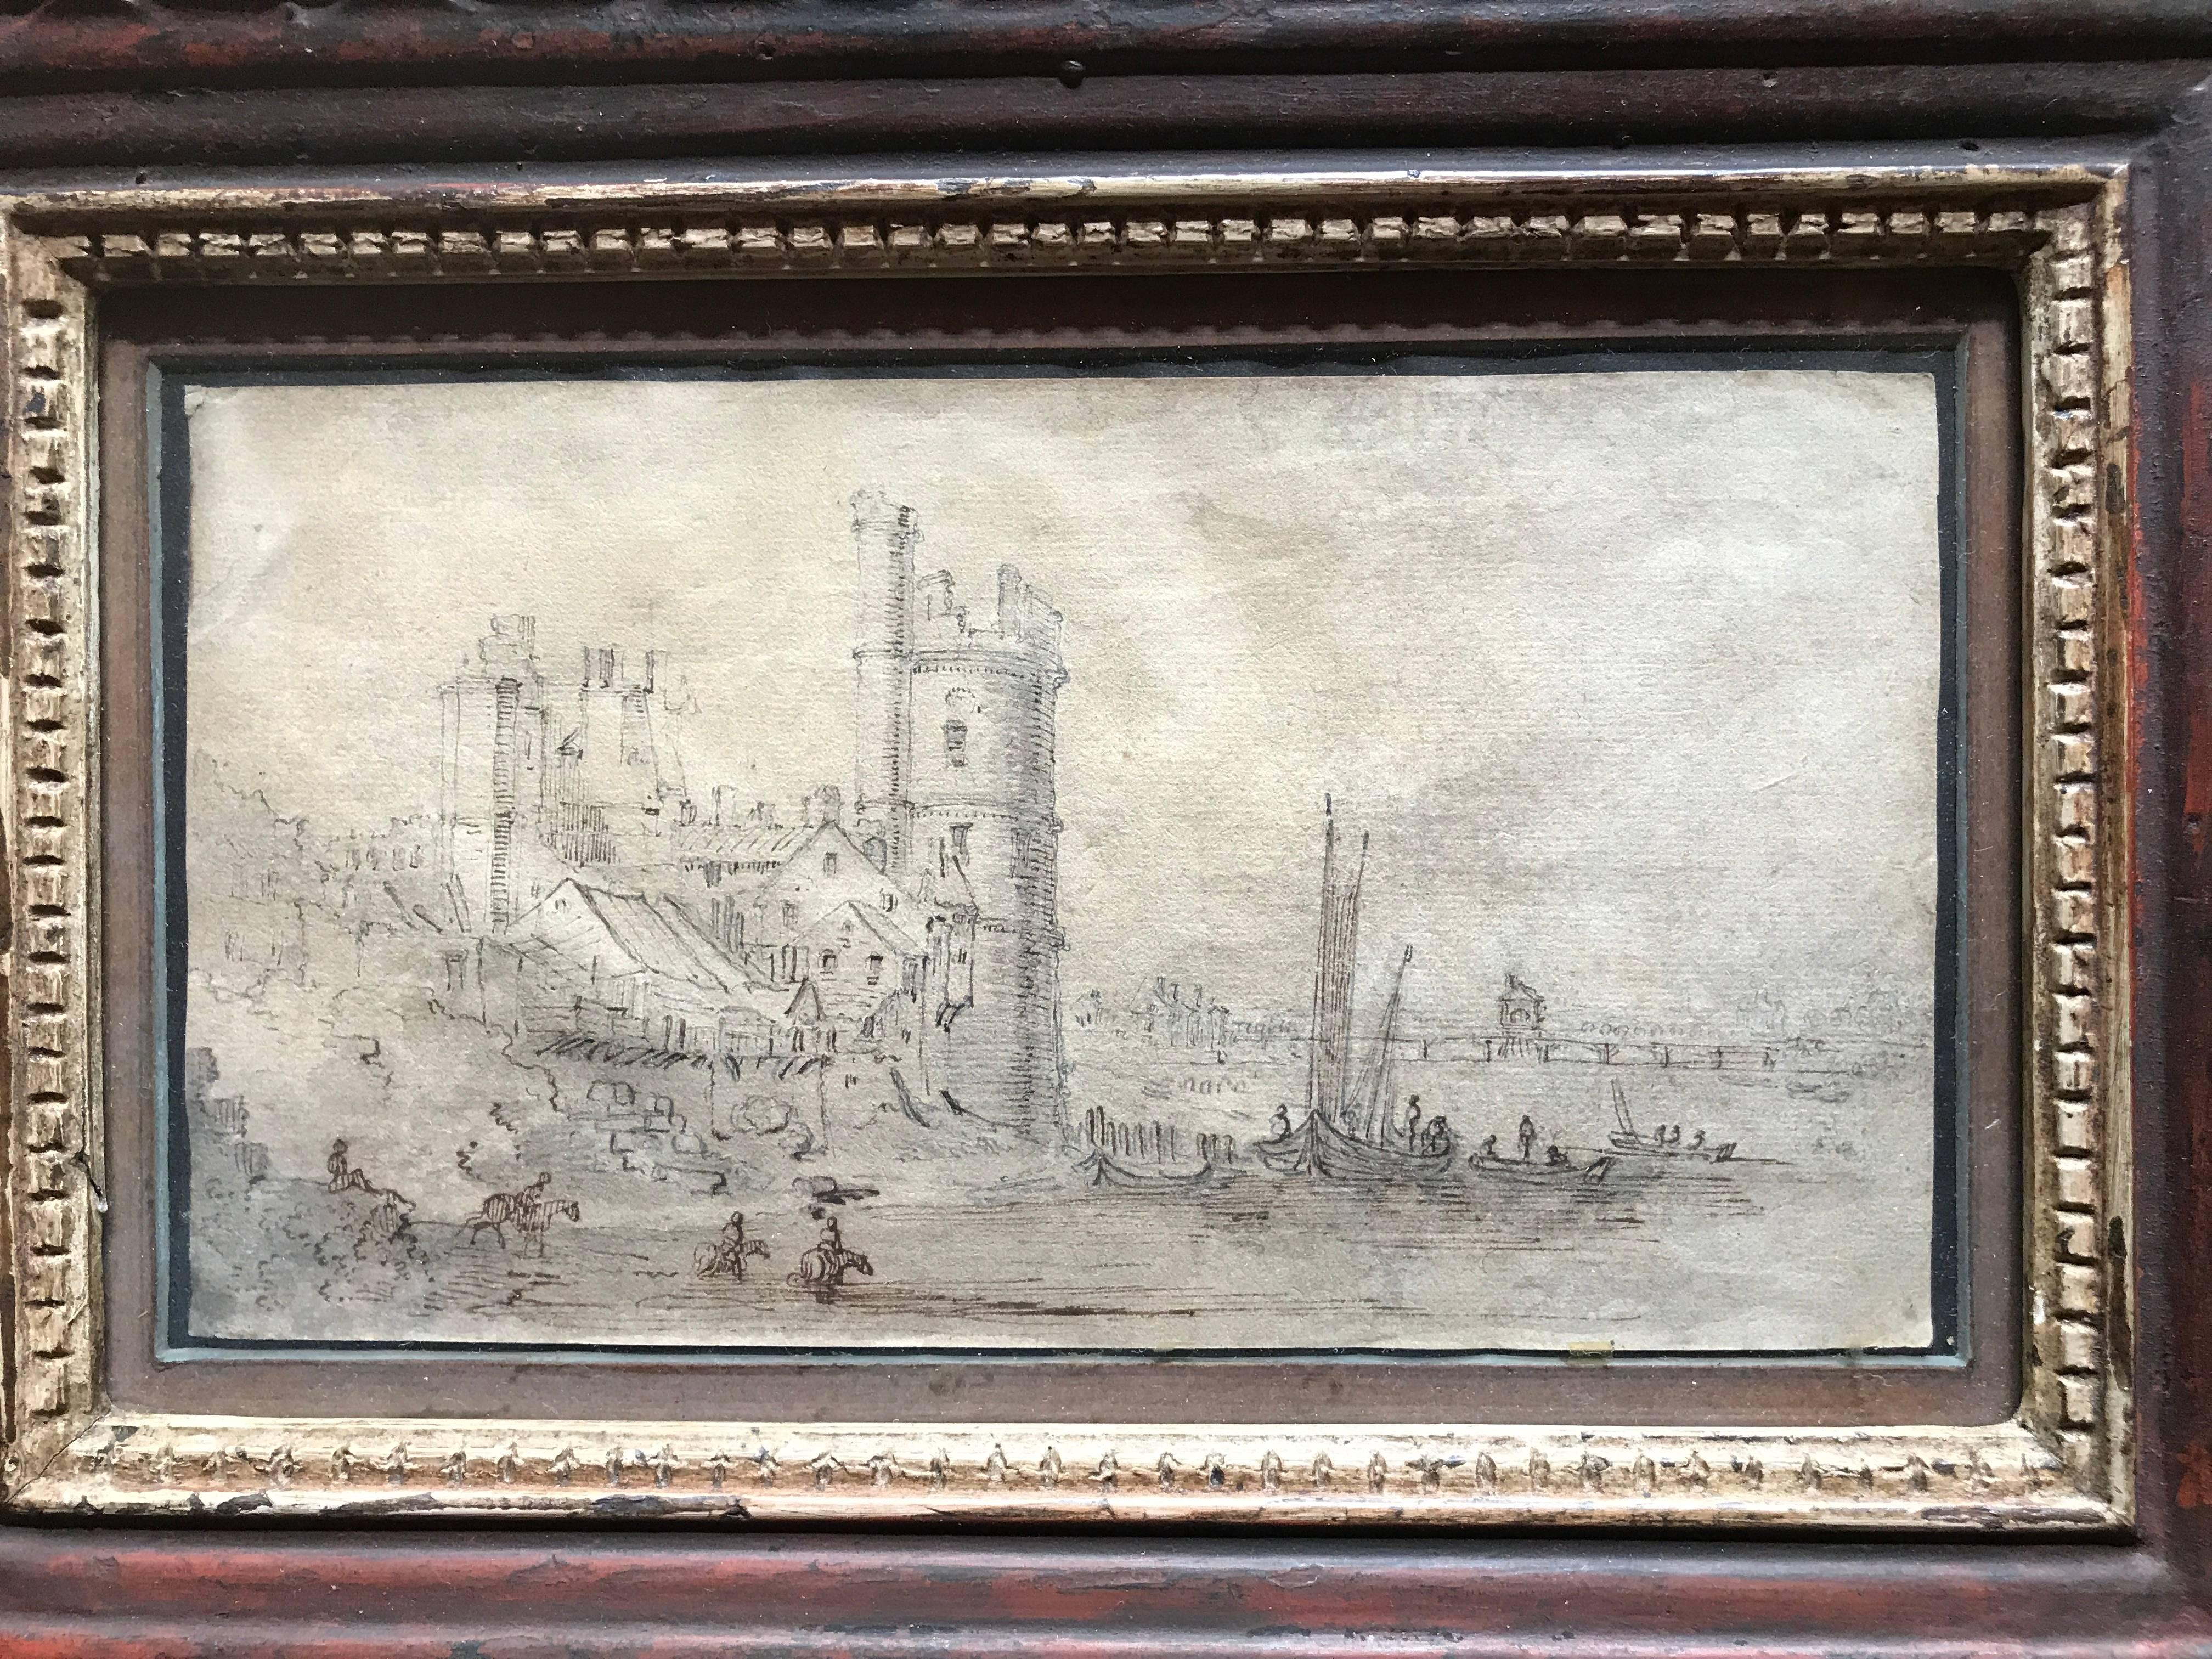 Old master drawing in open and wash on paper depicting the Tour de Nesle on the Seine across from the Lourve. In a period frame with red paint and gilding. 

According to a catalog dated 1966 accompanying the drawing from the Herbert E. Feist